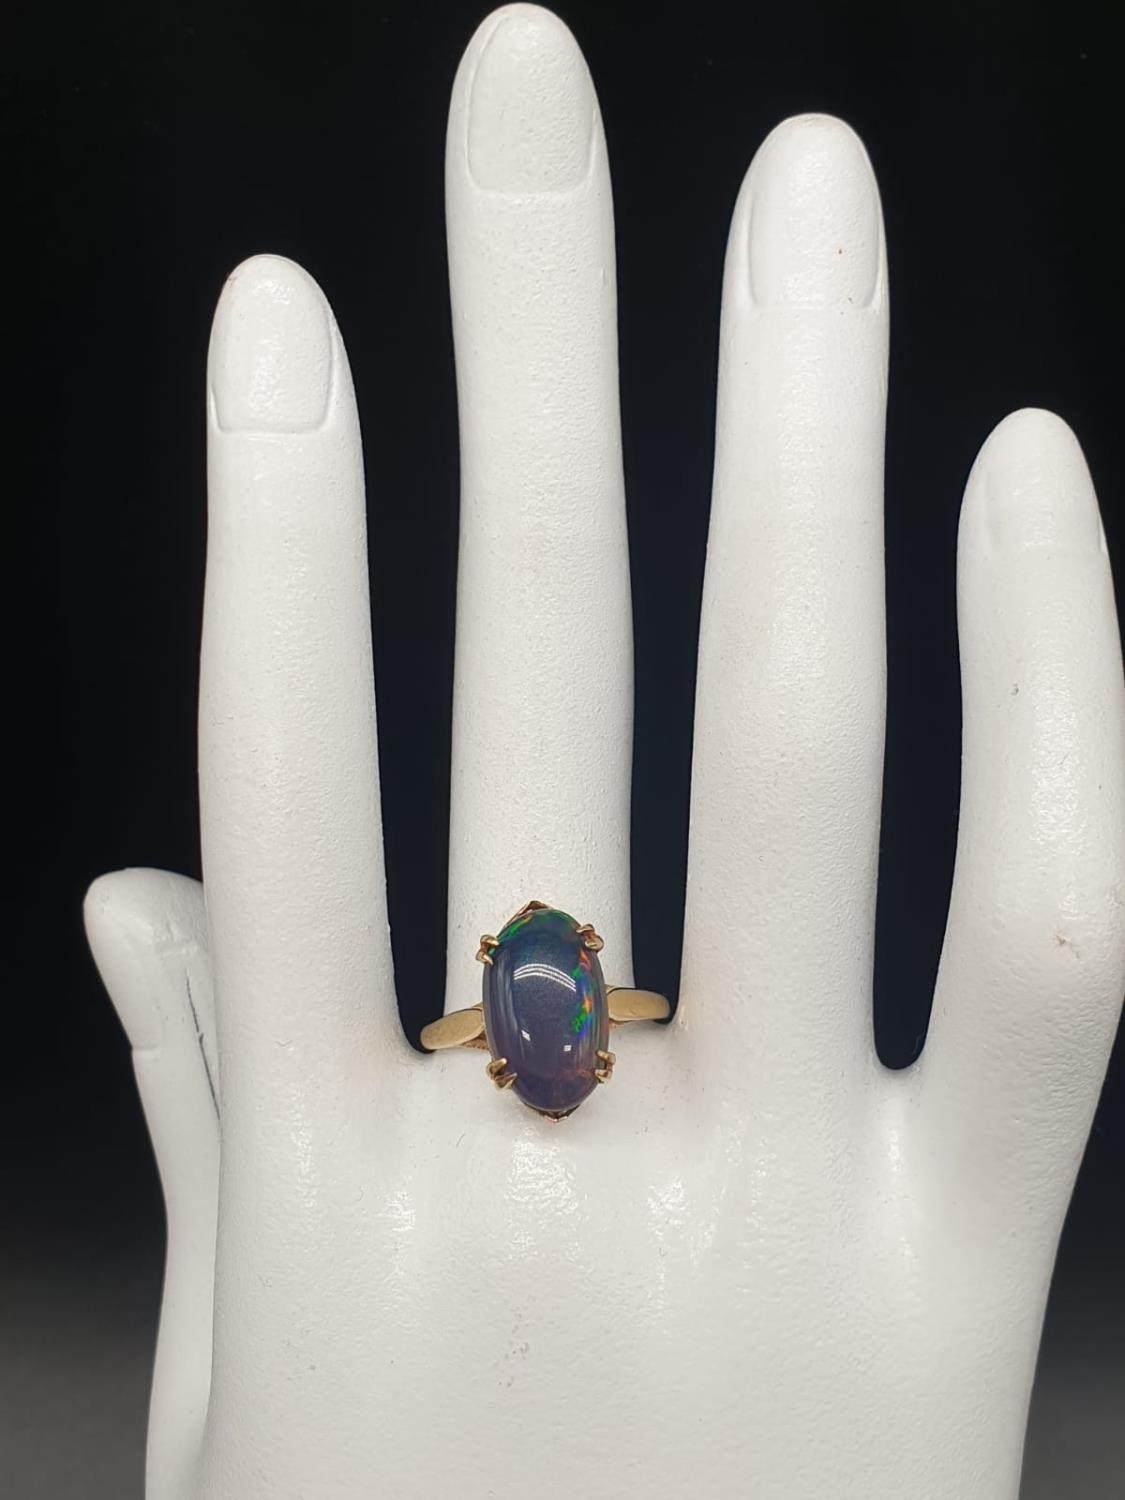 9K Yellow Gold Green Opal Solitaire Ring. Size P. 2.6g - Image 6 of 6